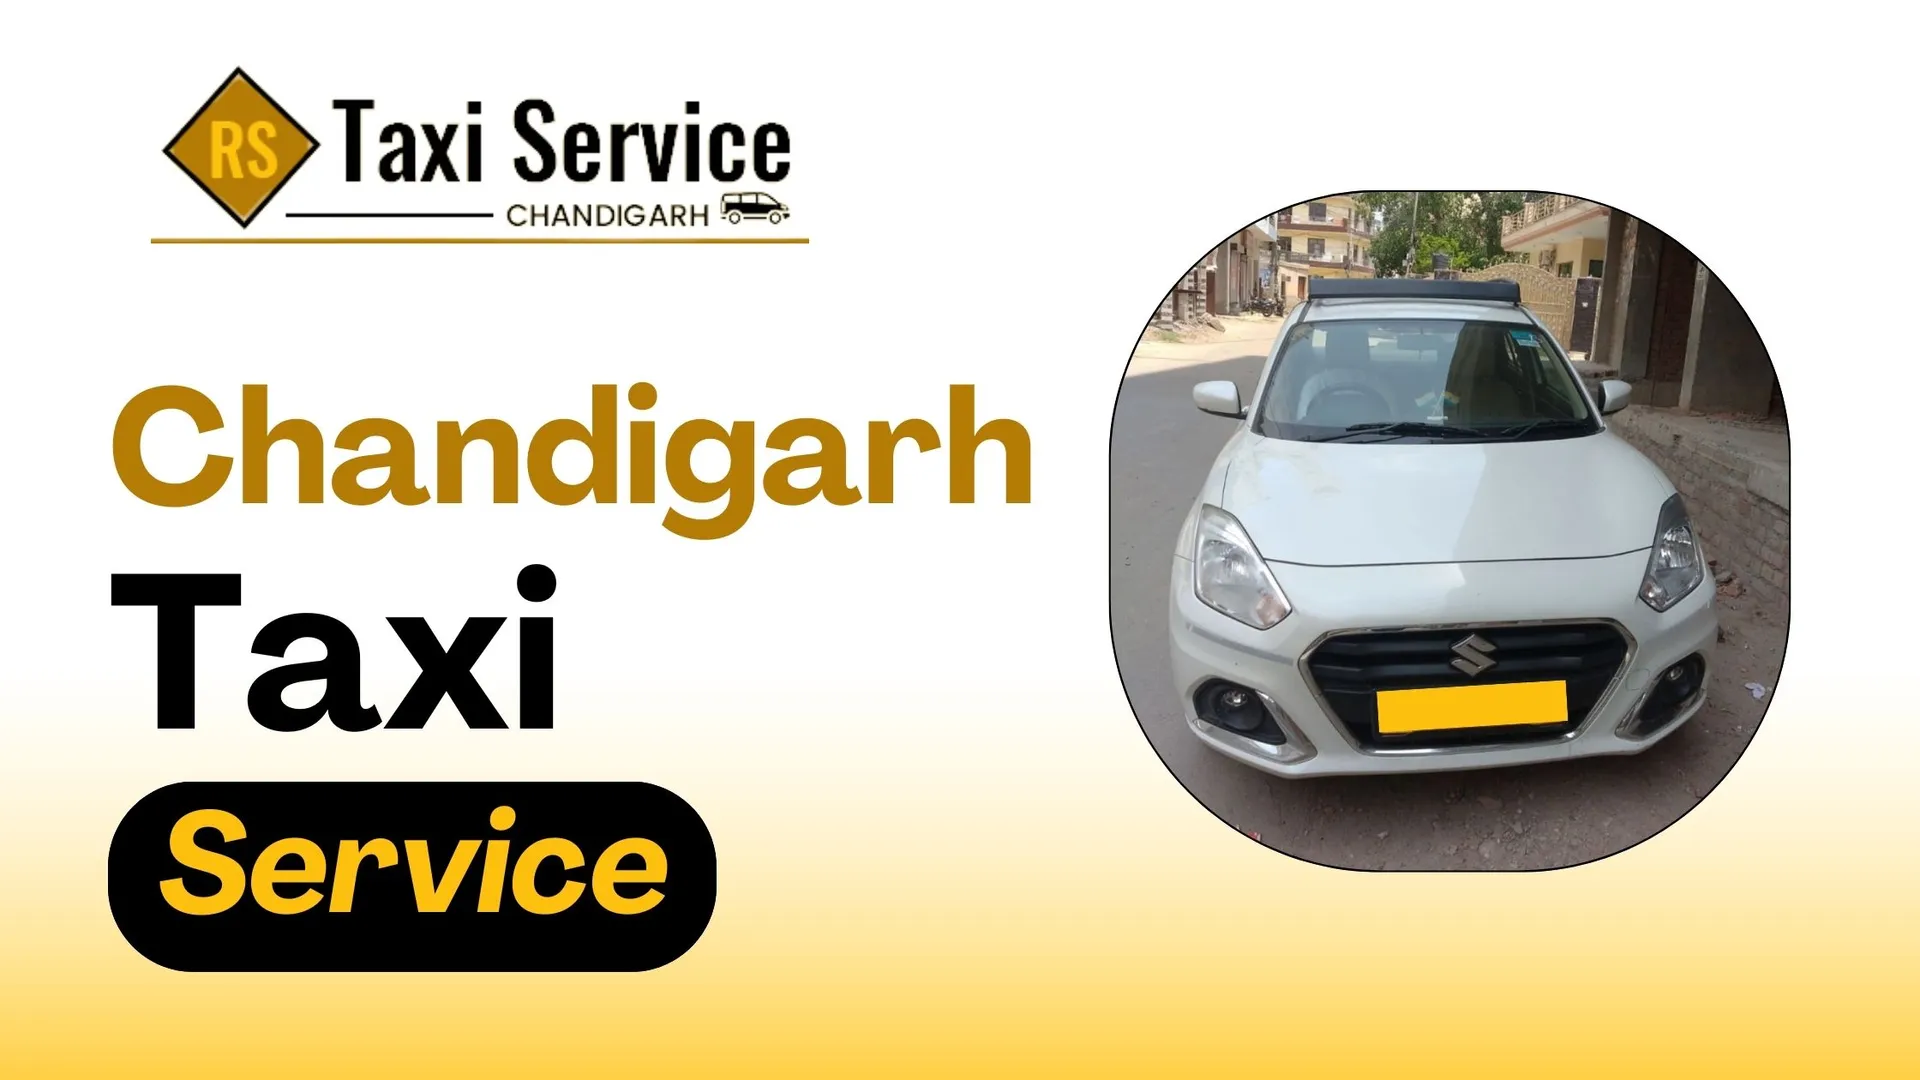 RS Taxi Service - Your Reliable Chandigarh Taxi Service

Welcome to RS Taxi Service, your trusted and dependable Chandigarh taxi service provider. With a strong commitment to customer satisfaction and a passion for excellence, we take pride in offering a seamless and comfortable travel experience for all our clients.

Visit RS taxi service Chandigarh now. https://www.chandigarhtaxiservice.net/